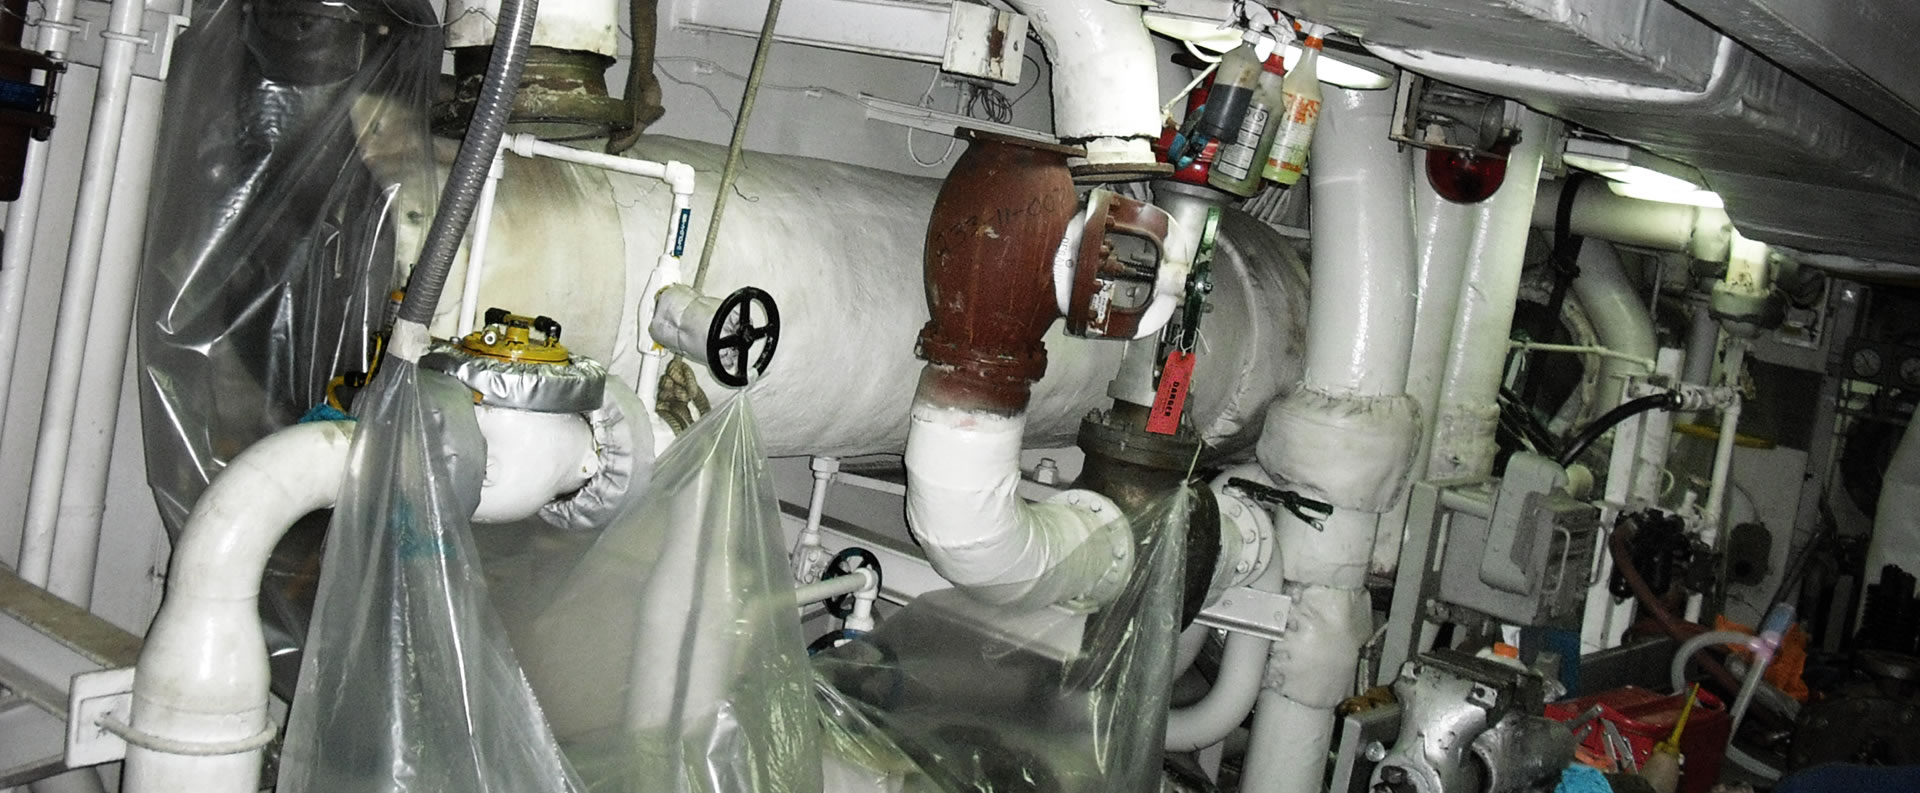 In-Situ Chemical Flushing of Coolers using US Navy Approved Dynamic Descaler
